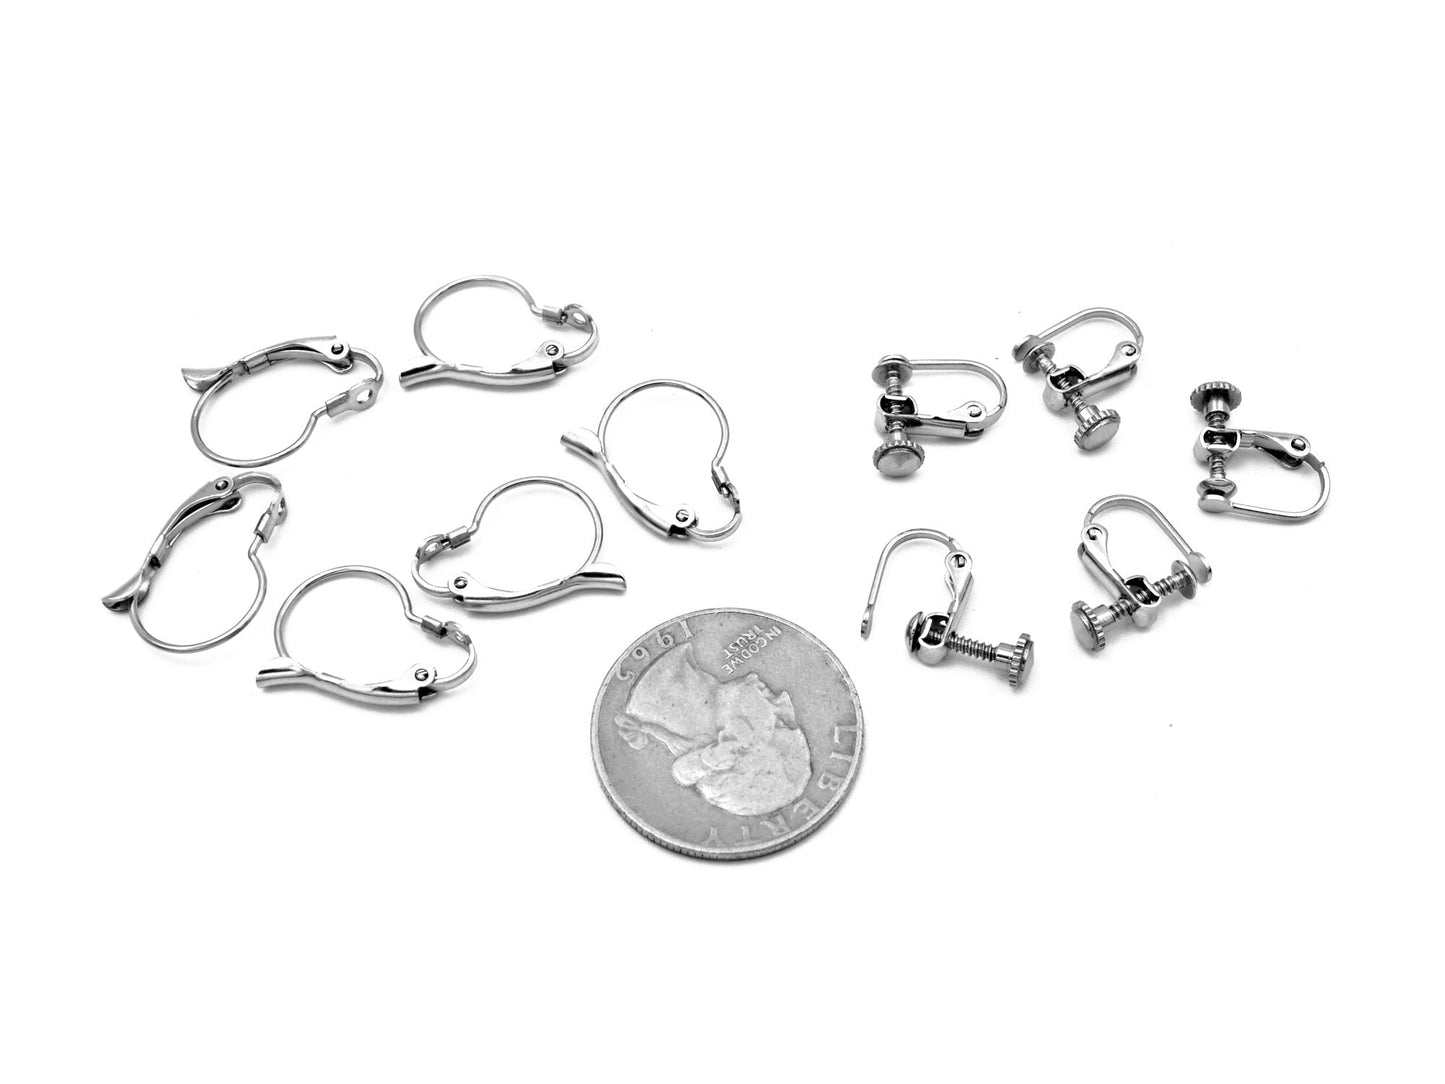 12 PCs Stainless Steel Earring lever back and Screw hook Jewelry Findings Supply For Jewelry Making and Wholesale